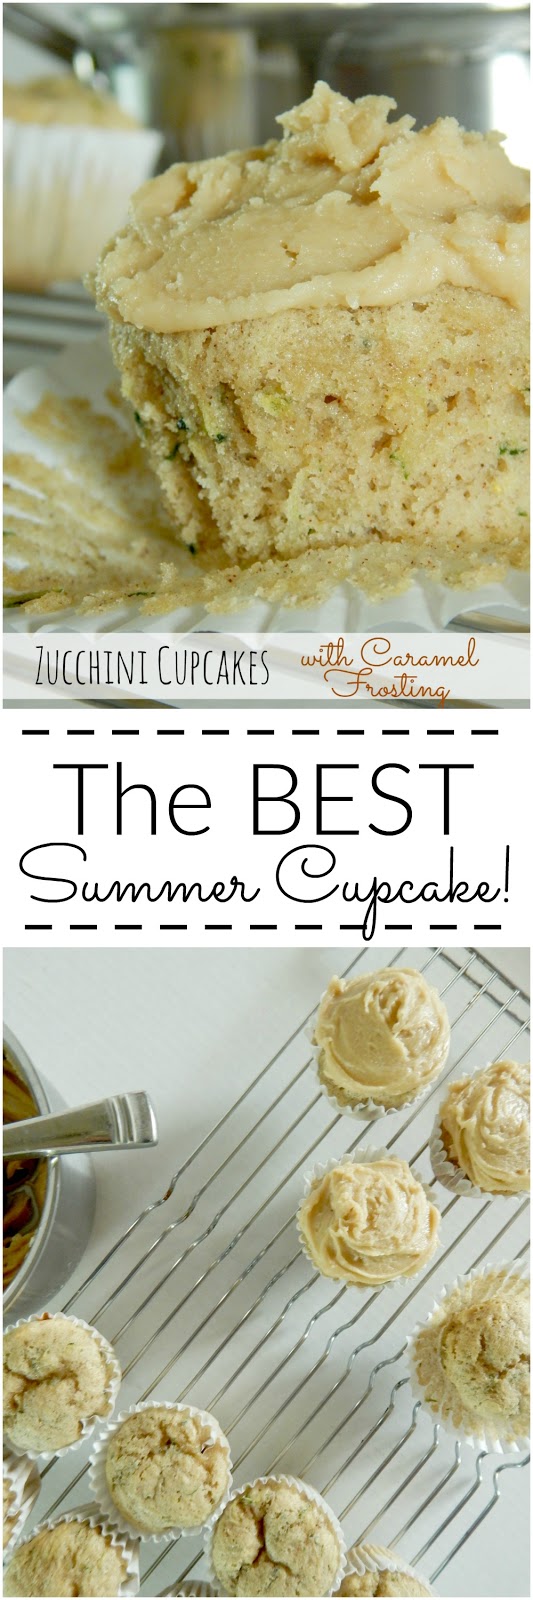 zucchini cupcakes with caramel frosting (sweetandsavoryfood.com)